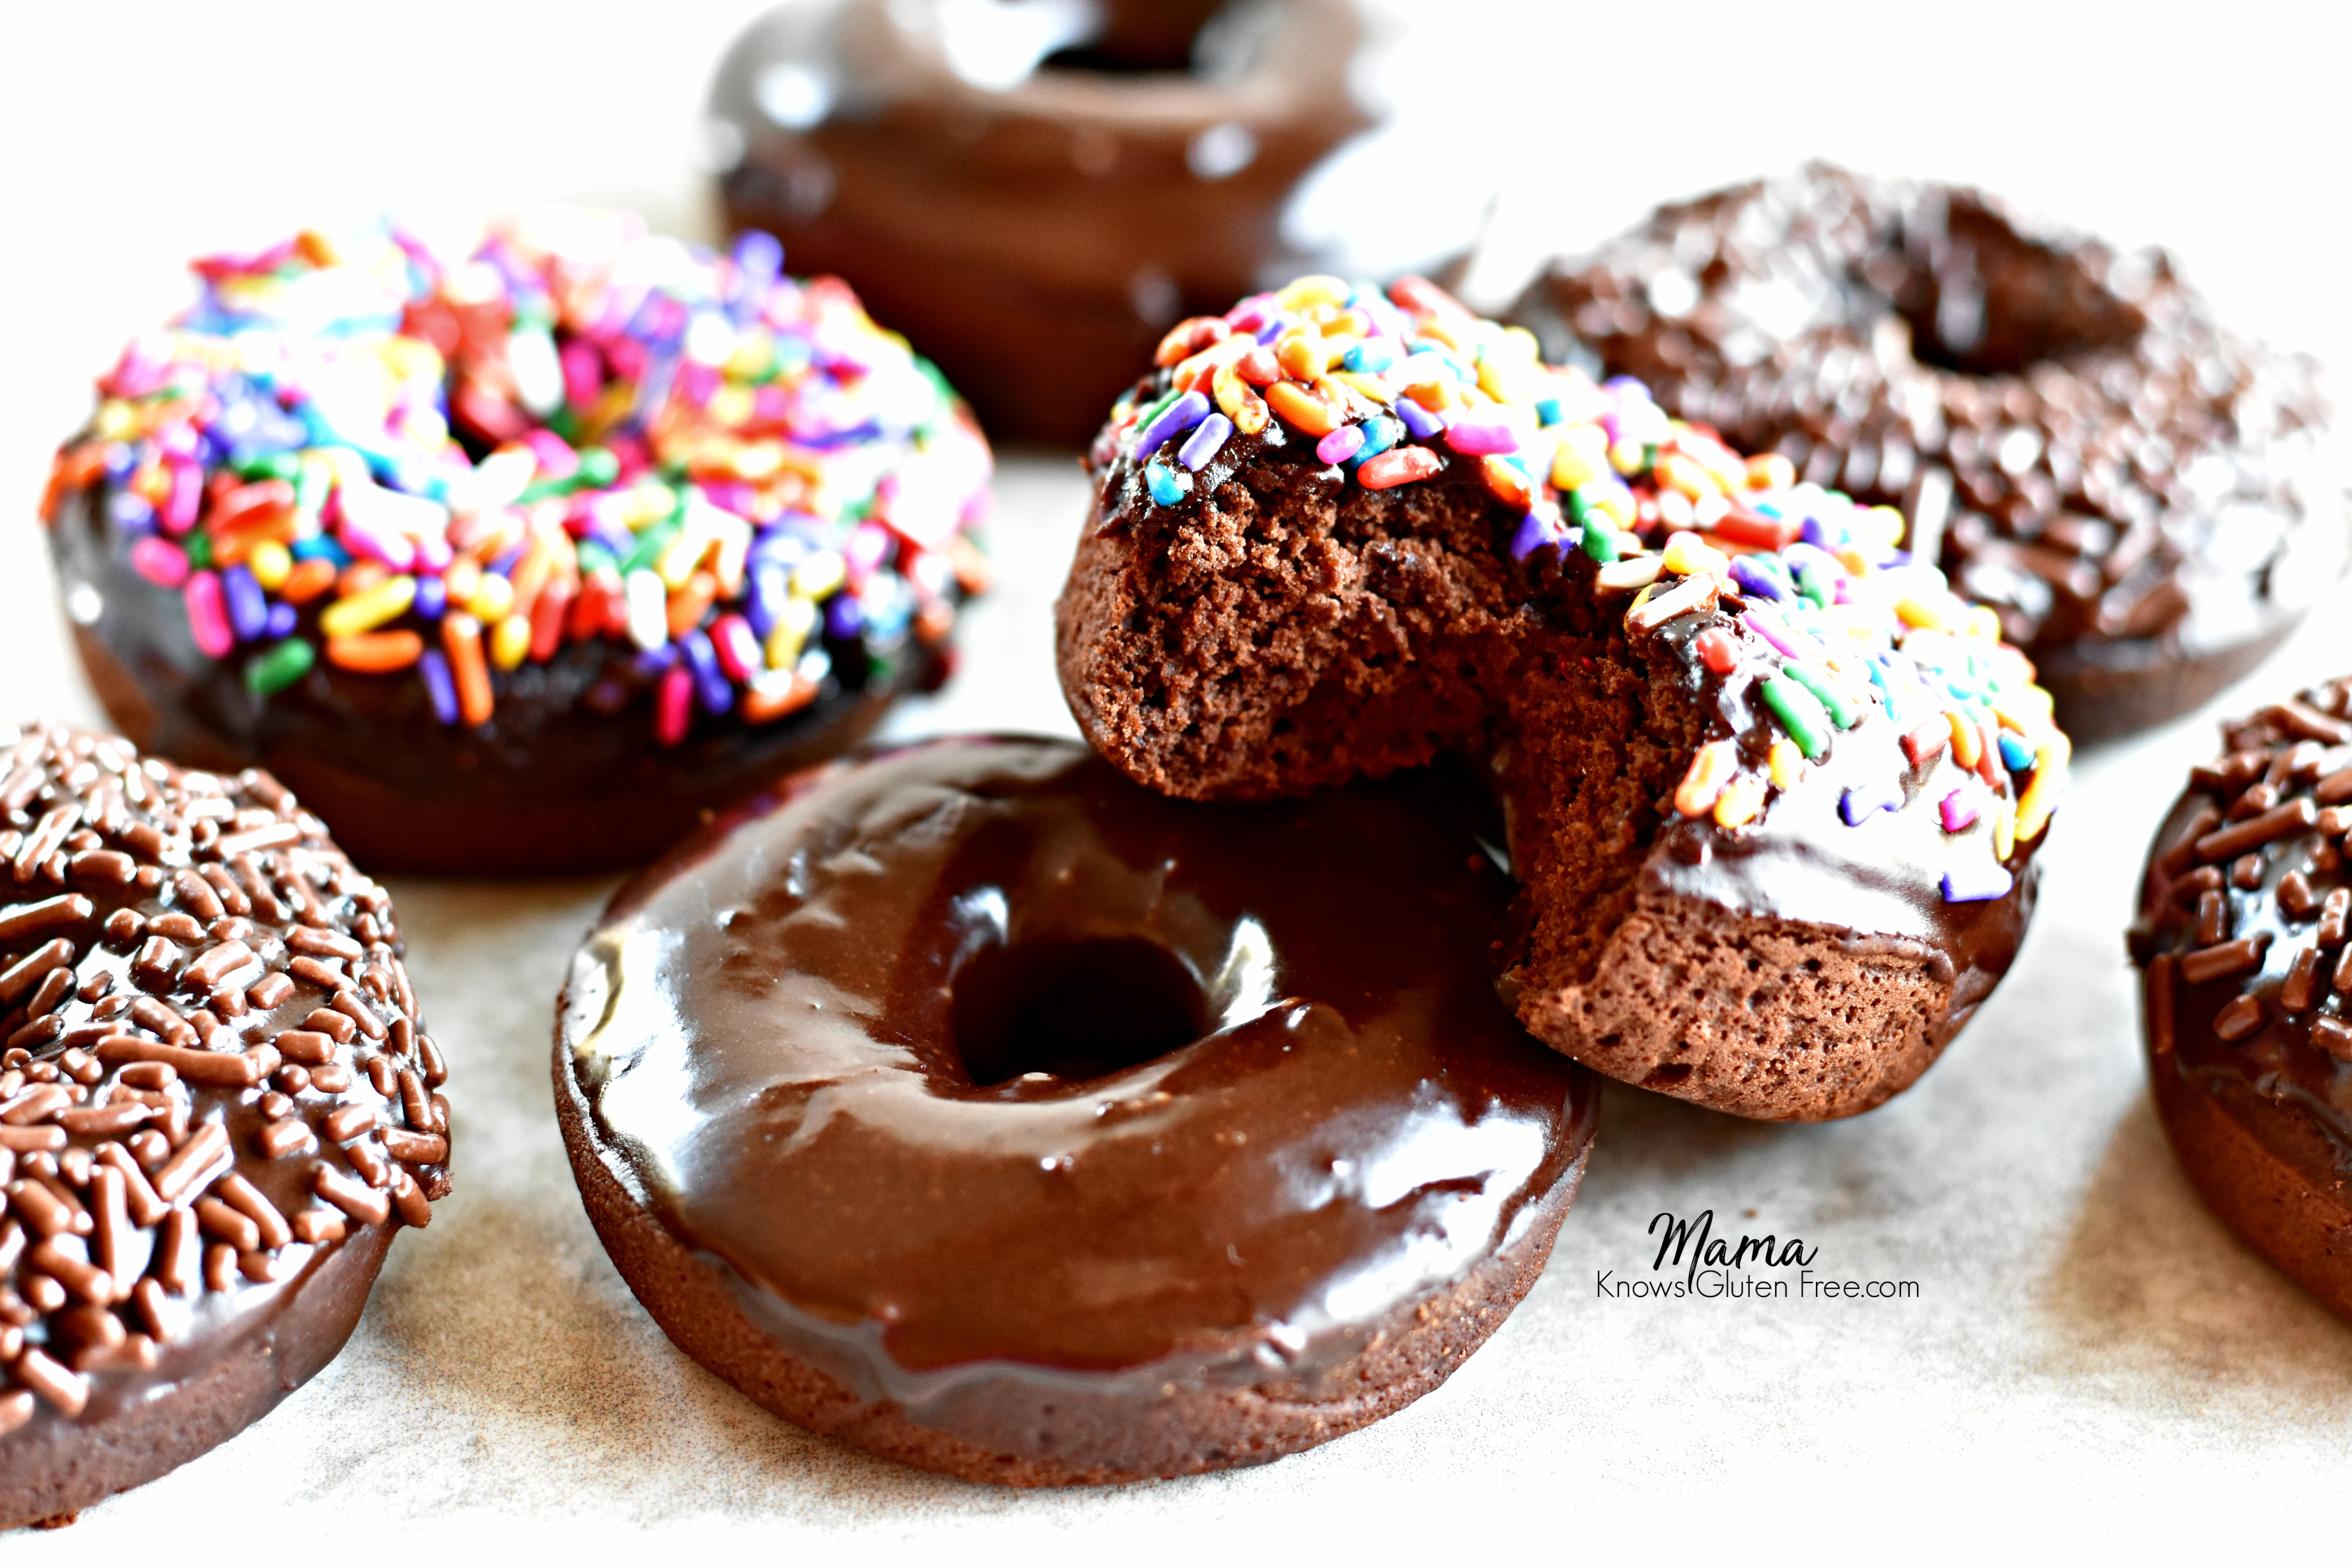 7 gluten-free baked chocolate donuts with one with a bite out of it to show the texture